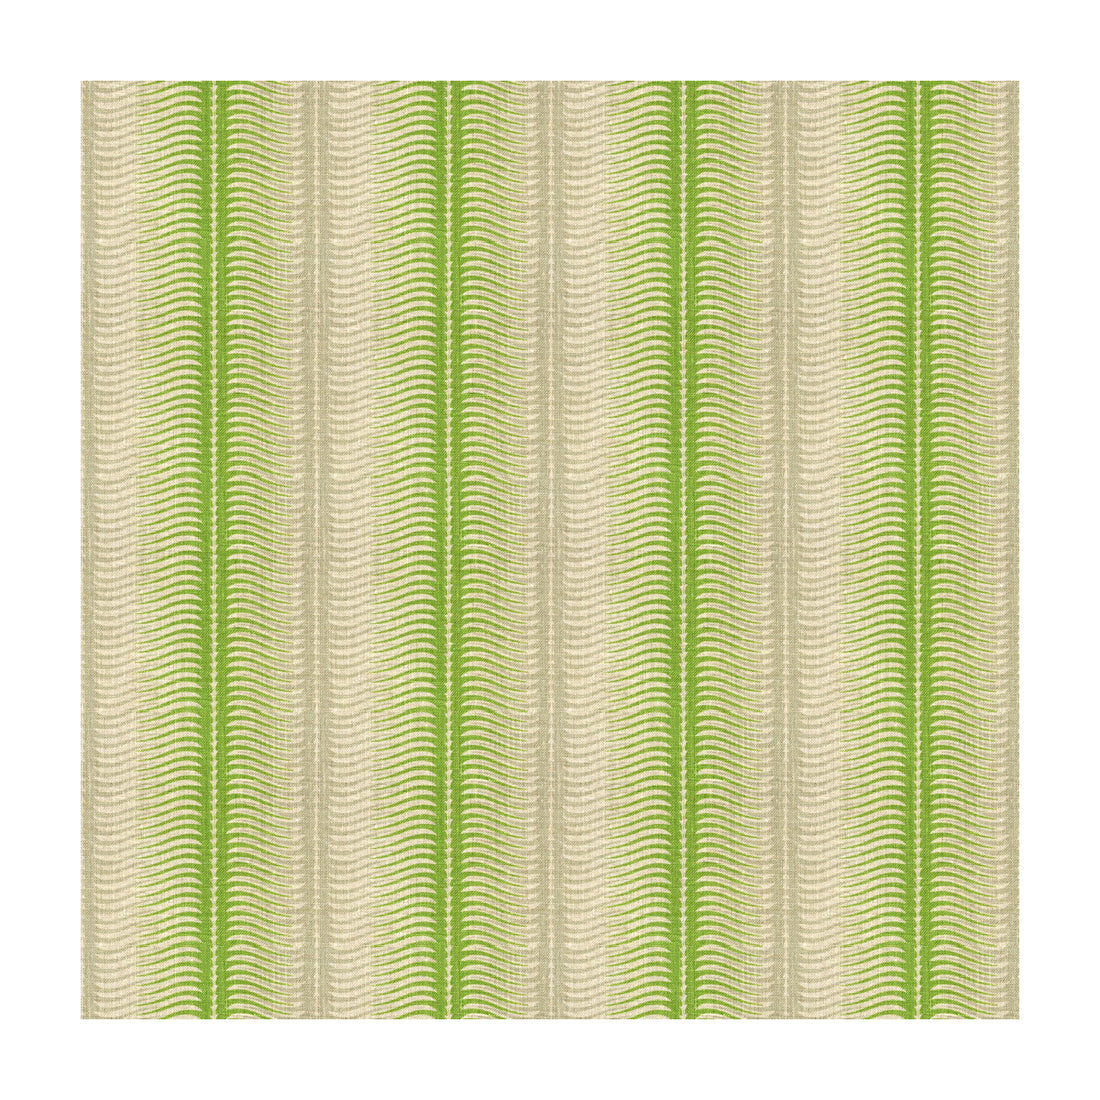 Stripes fabric in meadow color - pattern GWF-3509.3.0 - by Lee Jofa Modern in the Allegra Hicks Garden collection